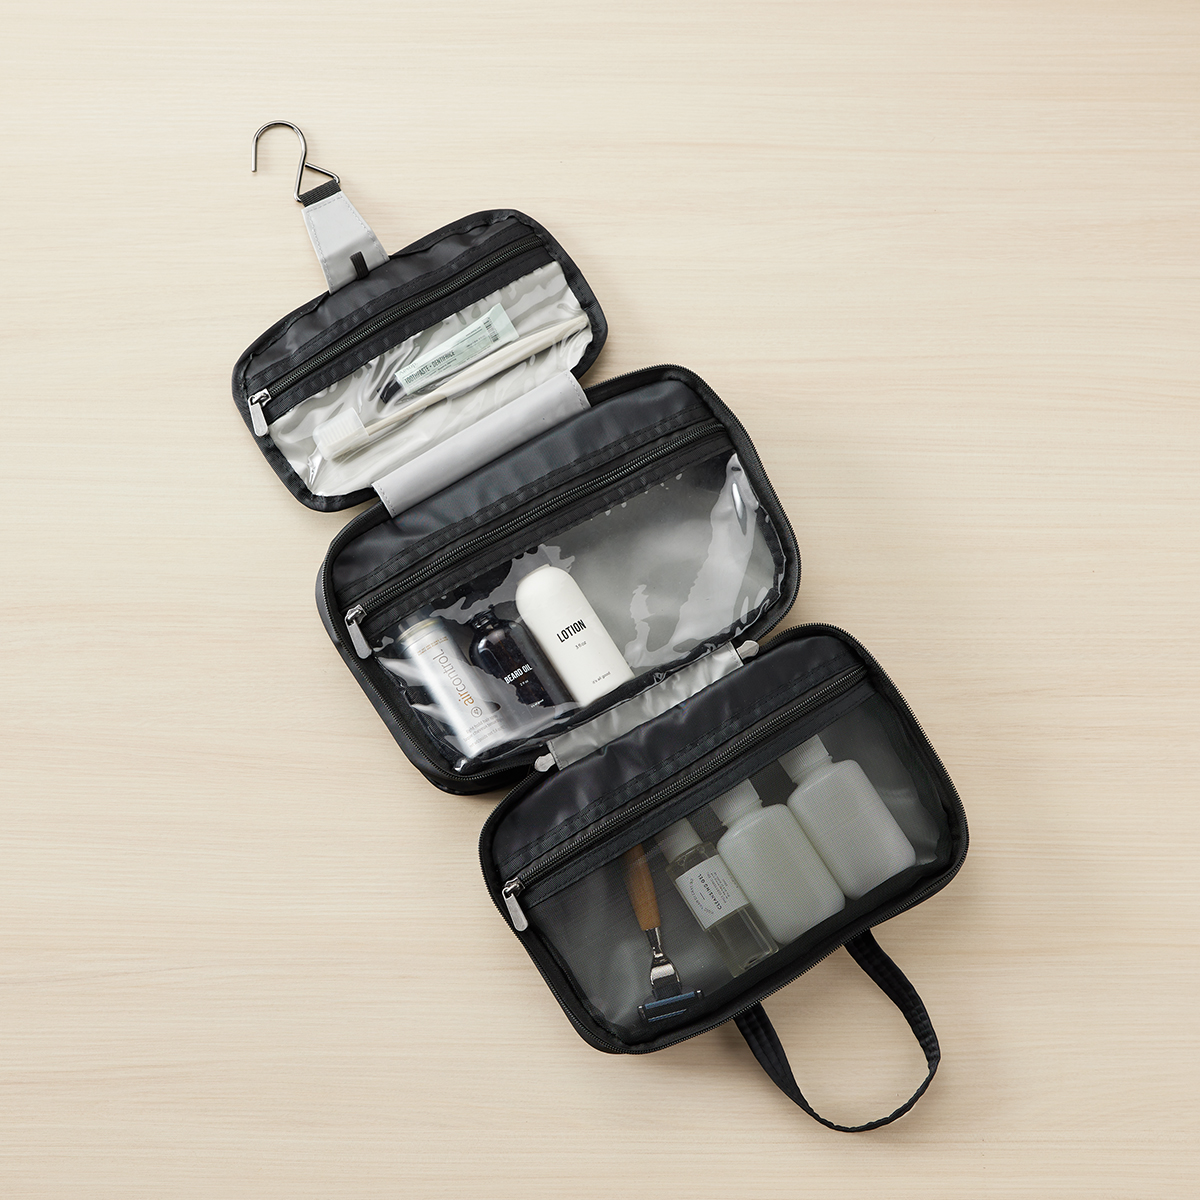 https://www.containerstore.com/catalogimages/484488/10092771-hanging-toiletry-bag.jpg